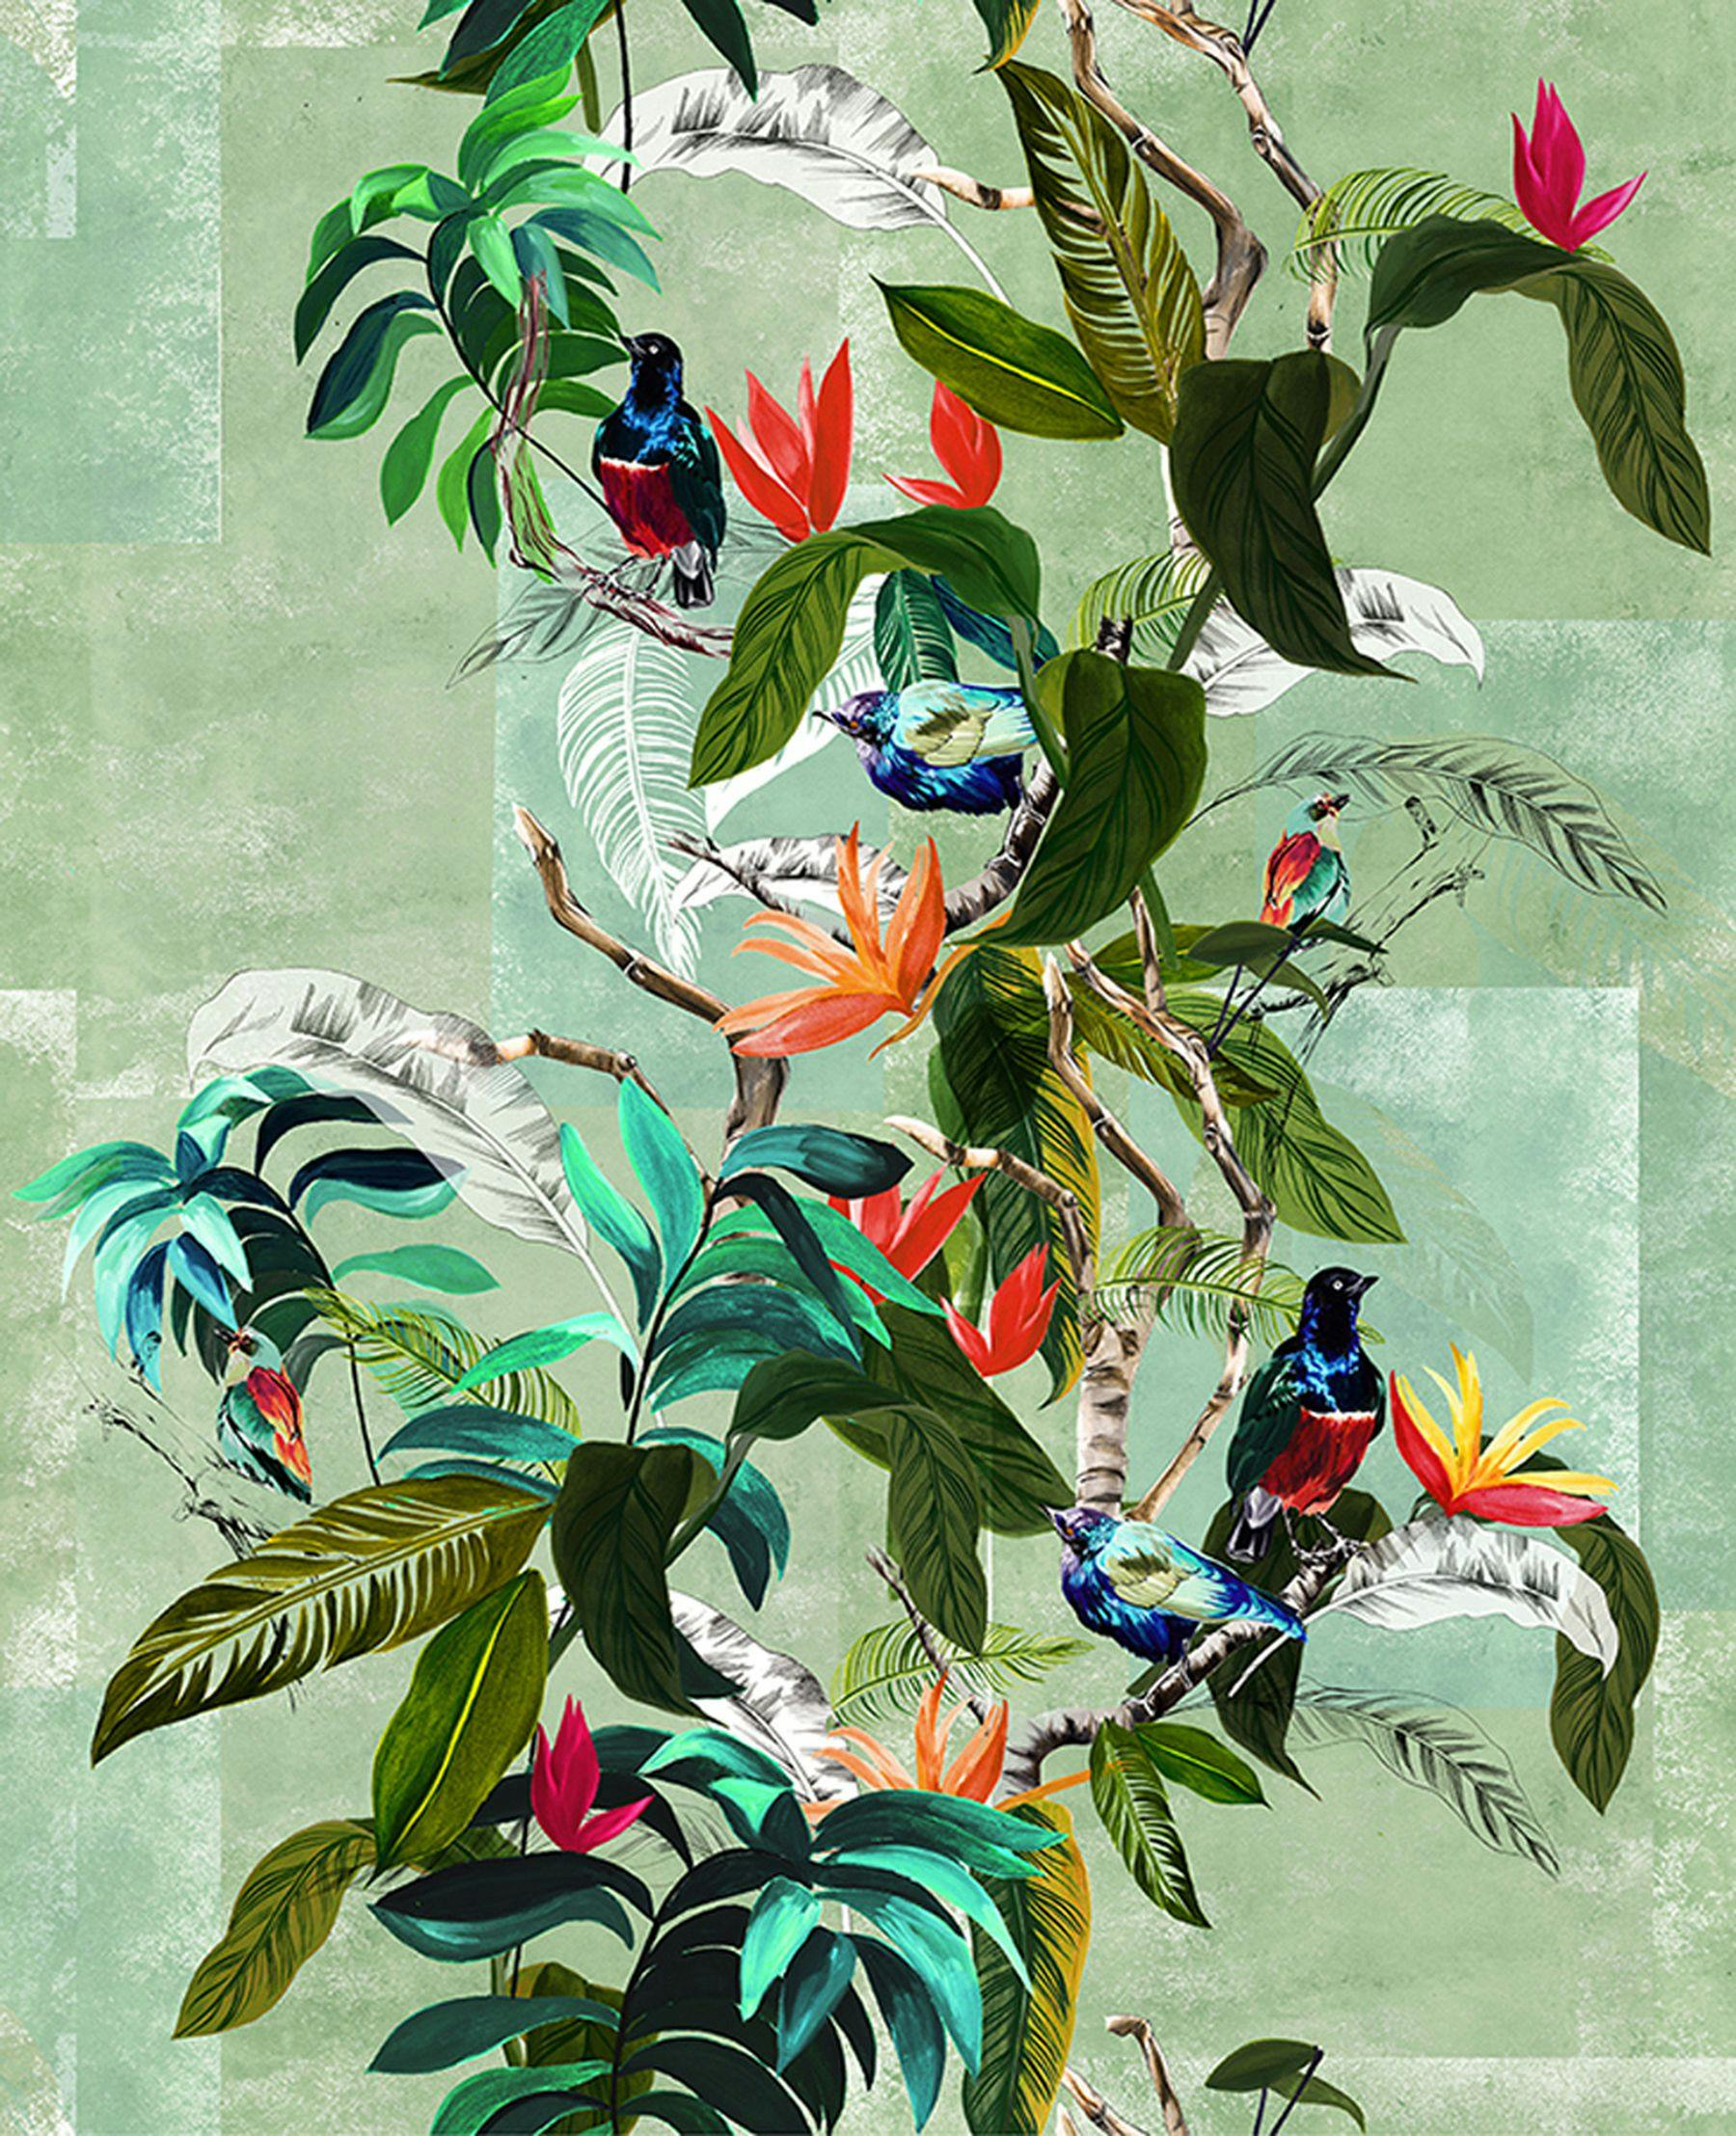 A digital pattern illustration featuring tropical leaves of various greens and oranges. Two birds are resting on the leaves and the background consists of a green print design.